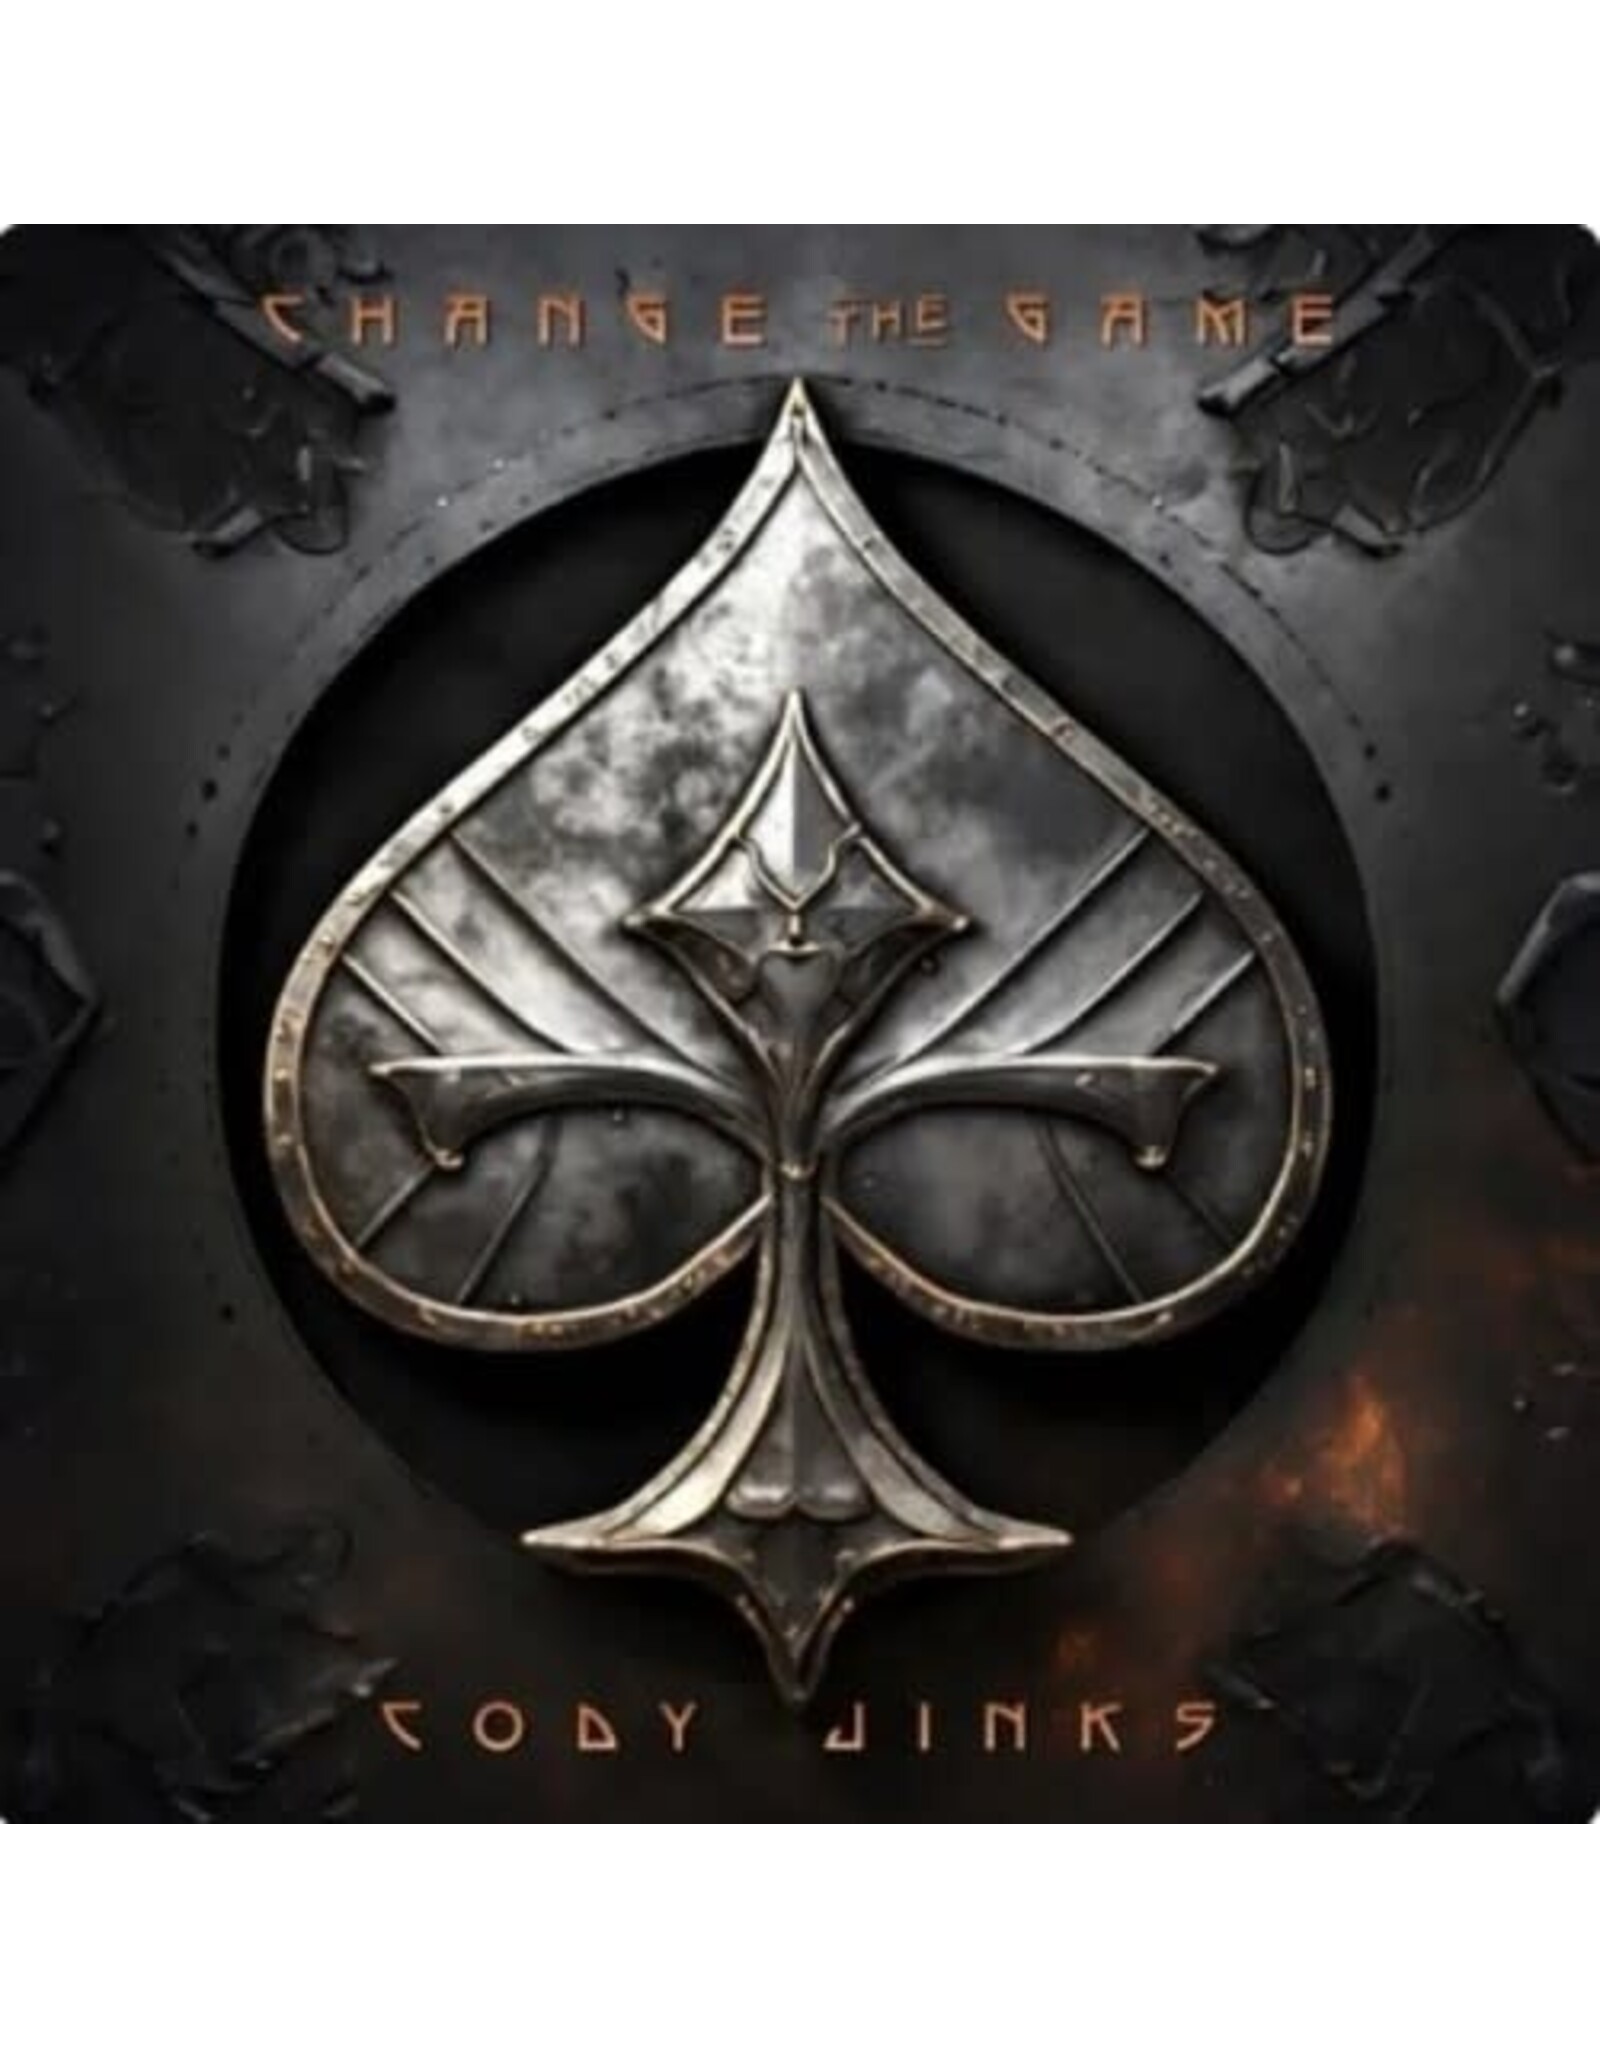 Jinks, Cody / Change The Game (Color Vinyl)